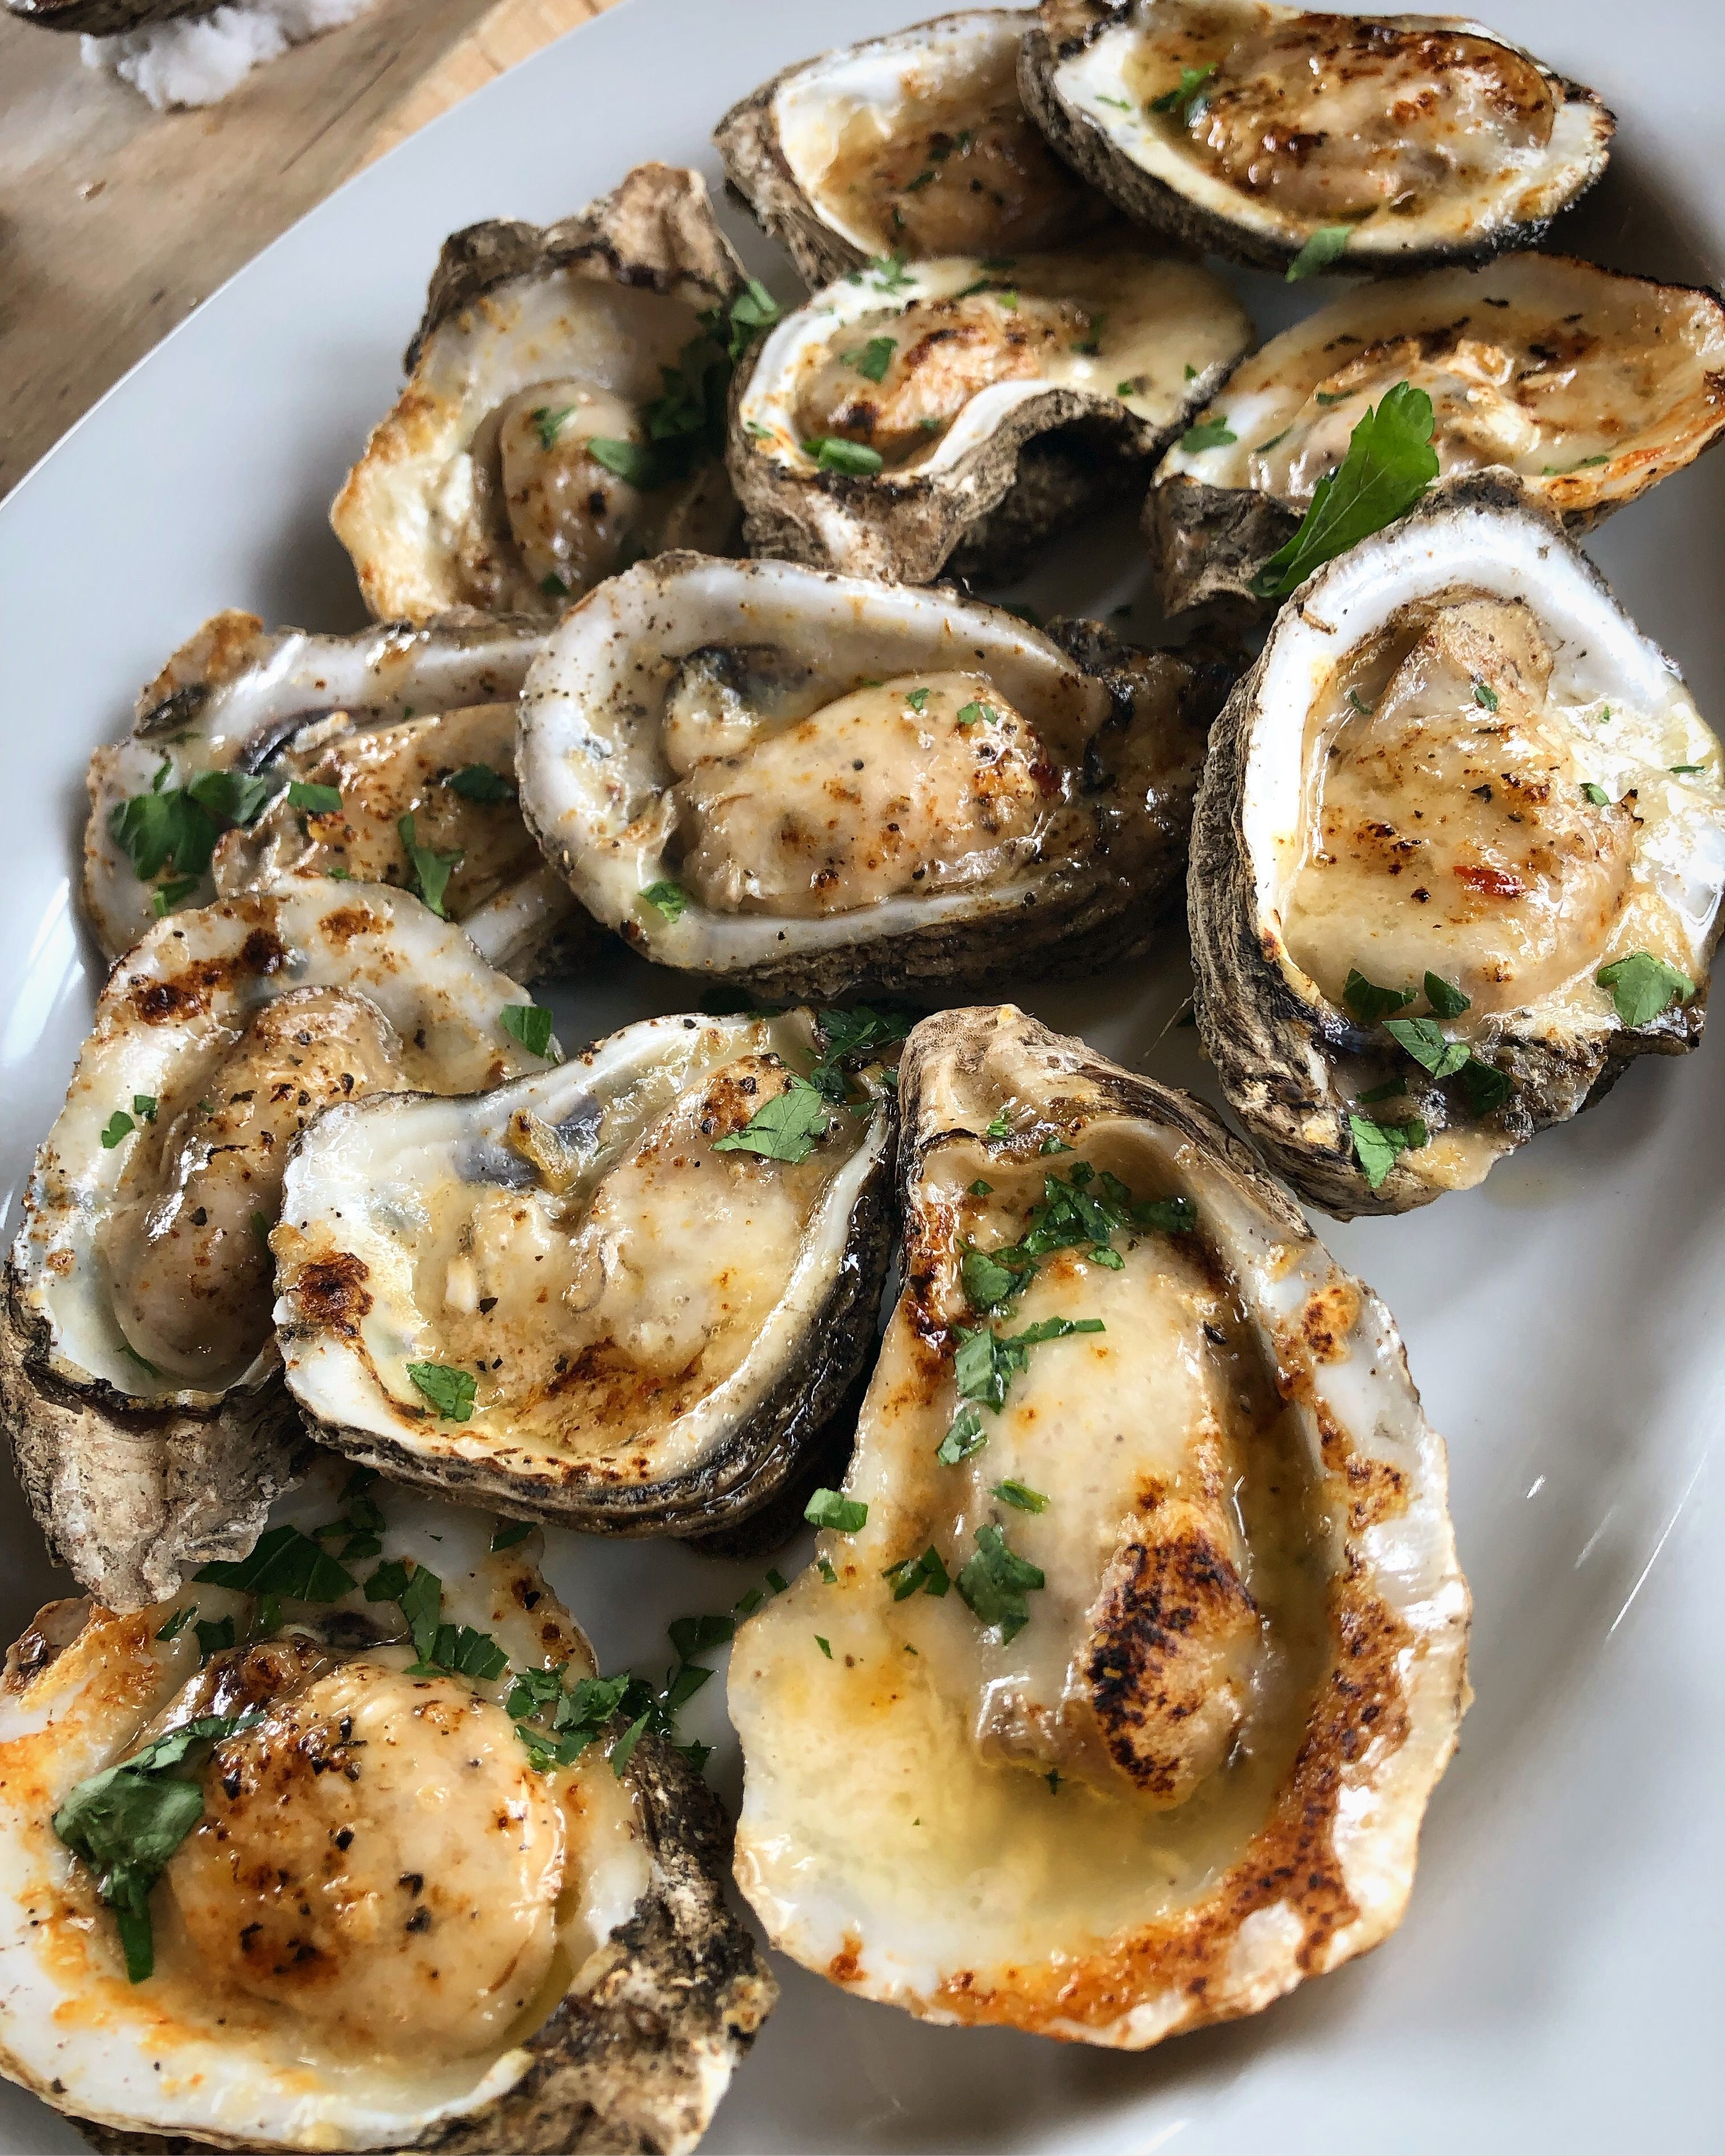 The Best Way To Eat An Oyster, According To Experts 